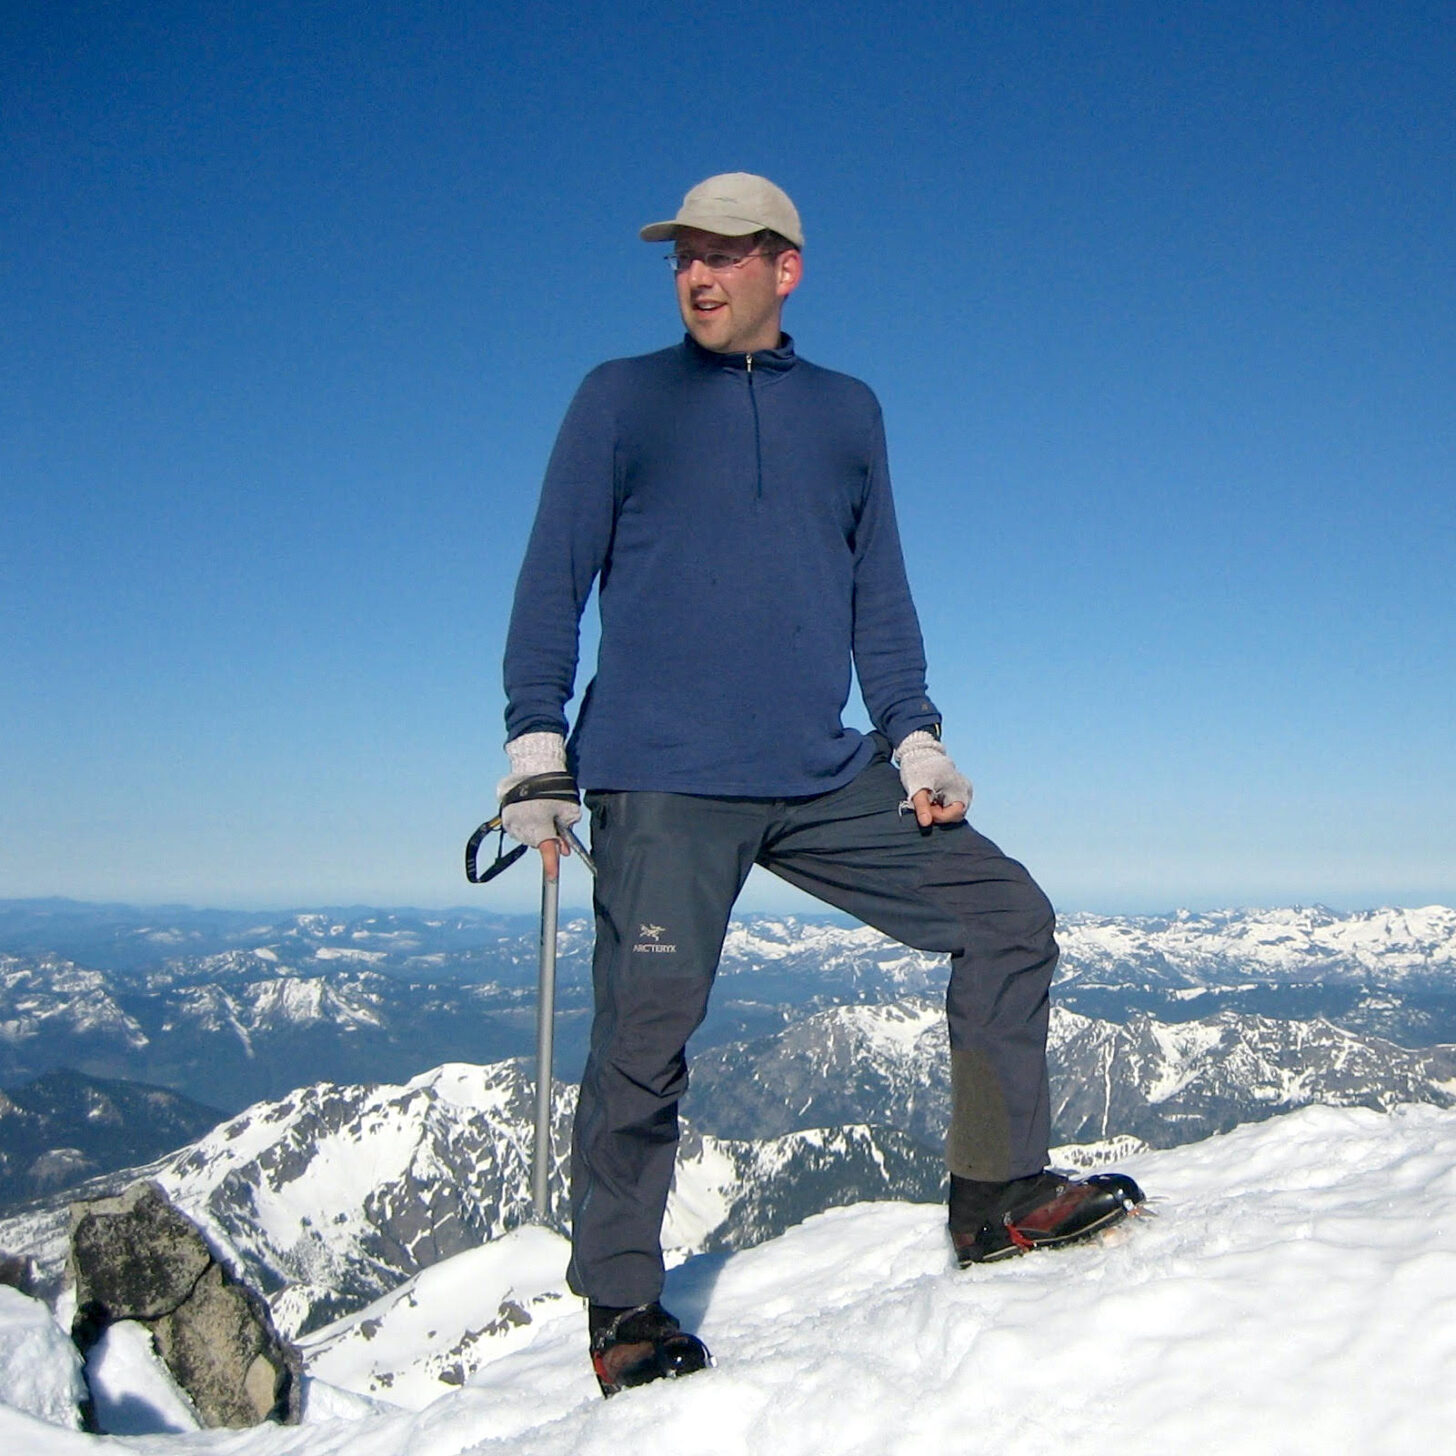 a man stands on a mountain peak with mountains in the background.